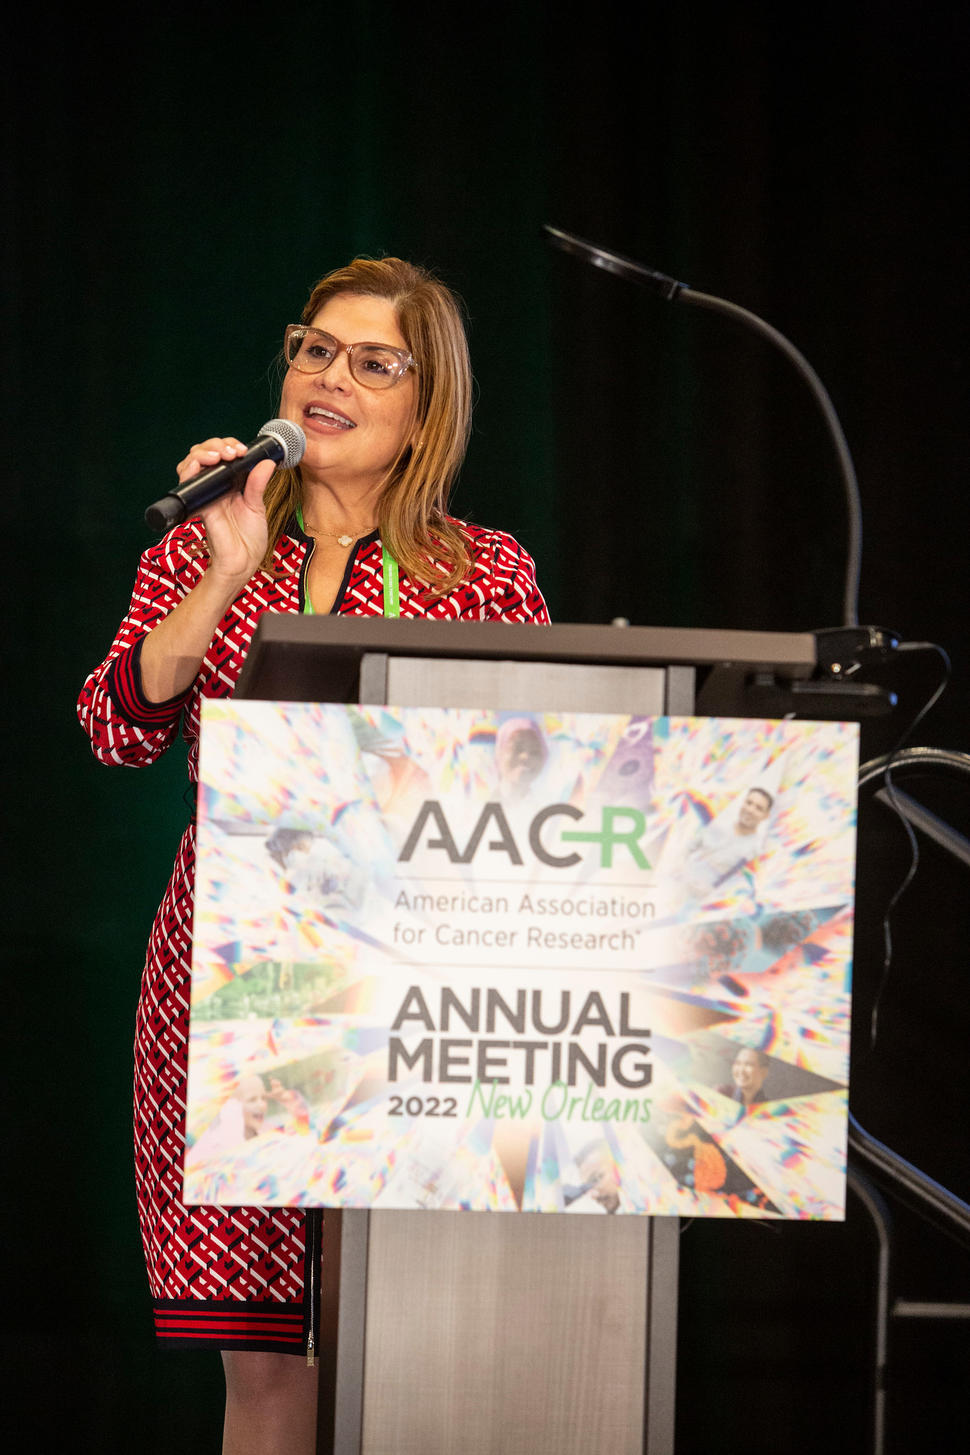 Dr. Marcia Cruz-Correa speaks from the lectern at the AACR Annual Meeting 2022.